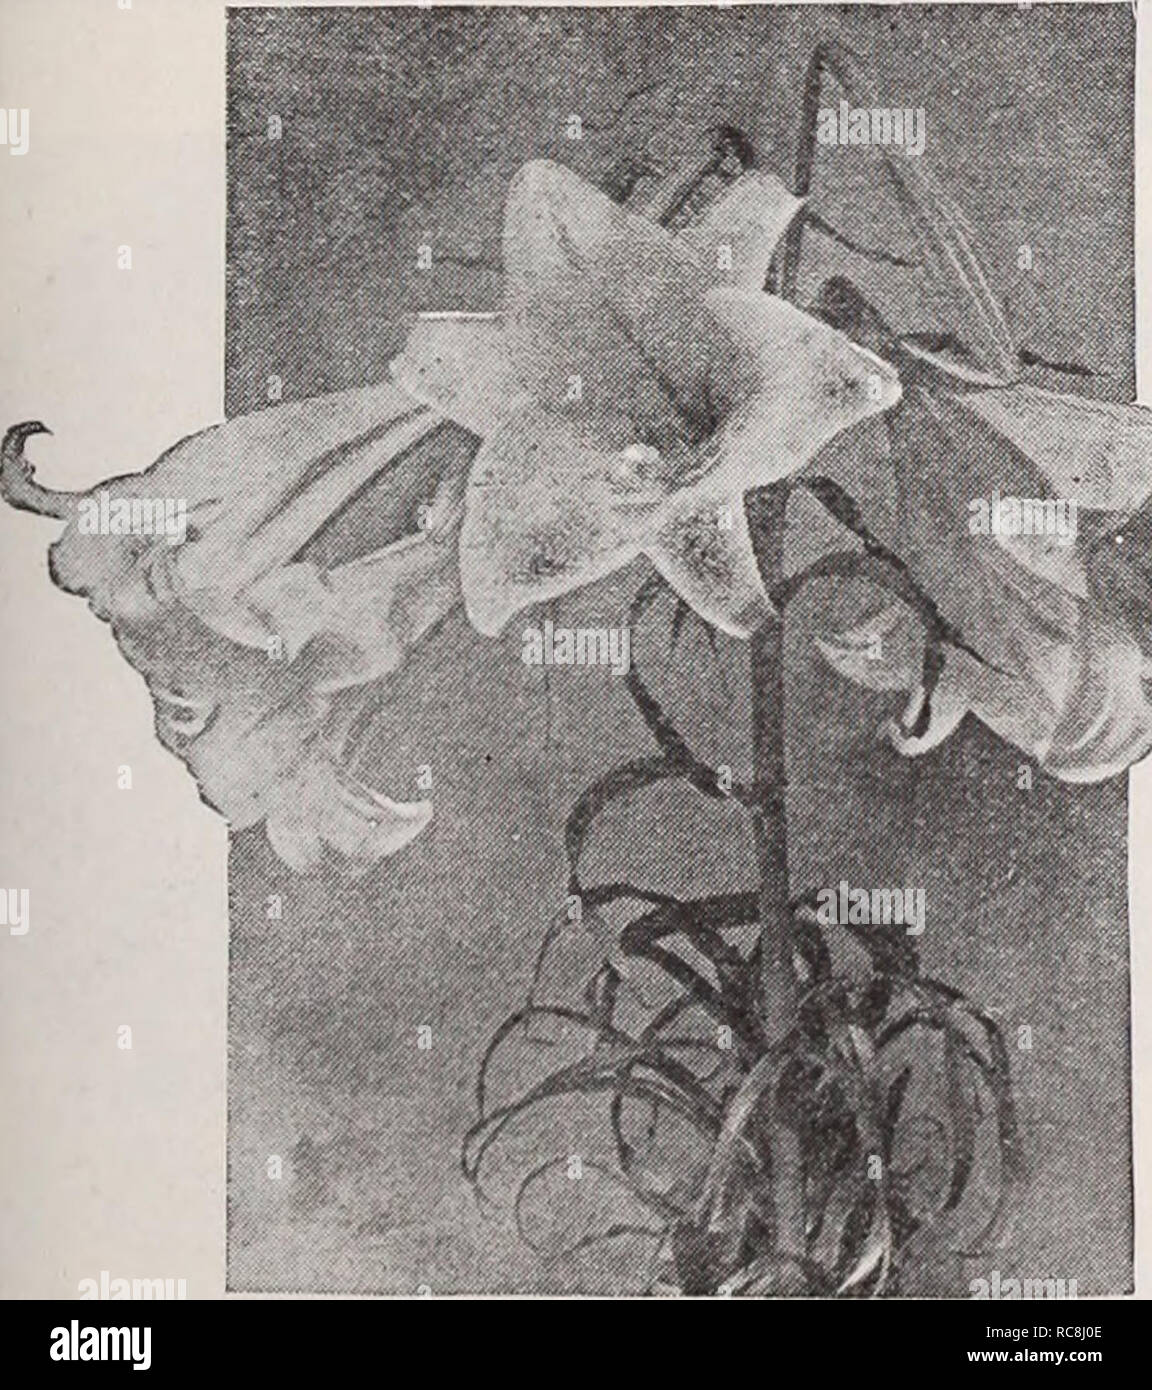 . Dreer's garden book / Henry A. Dreer.. Nursery Catalogue. Giant Imperial Larkspur Three Lovely Pink Double Annual Larkspurs 2936 Exquisite Pink Improved. A greatly im- proved strain both in the upright habit of growth and in the charming pink color, which comes practically 100 per cent. true, j oz., 40 PER PKT. cts. .$0 10 Lilium Piiilippinense Formosanum 2934 Exquisite Rose. Identical in every way to the foregoing but several tones deeper in color, being a rich rose pink that comes quite true.  oz., 40 cts 10 2945 Miss California {New). Of the new upright type. Flowers of a deep salmon ros Stock Photo